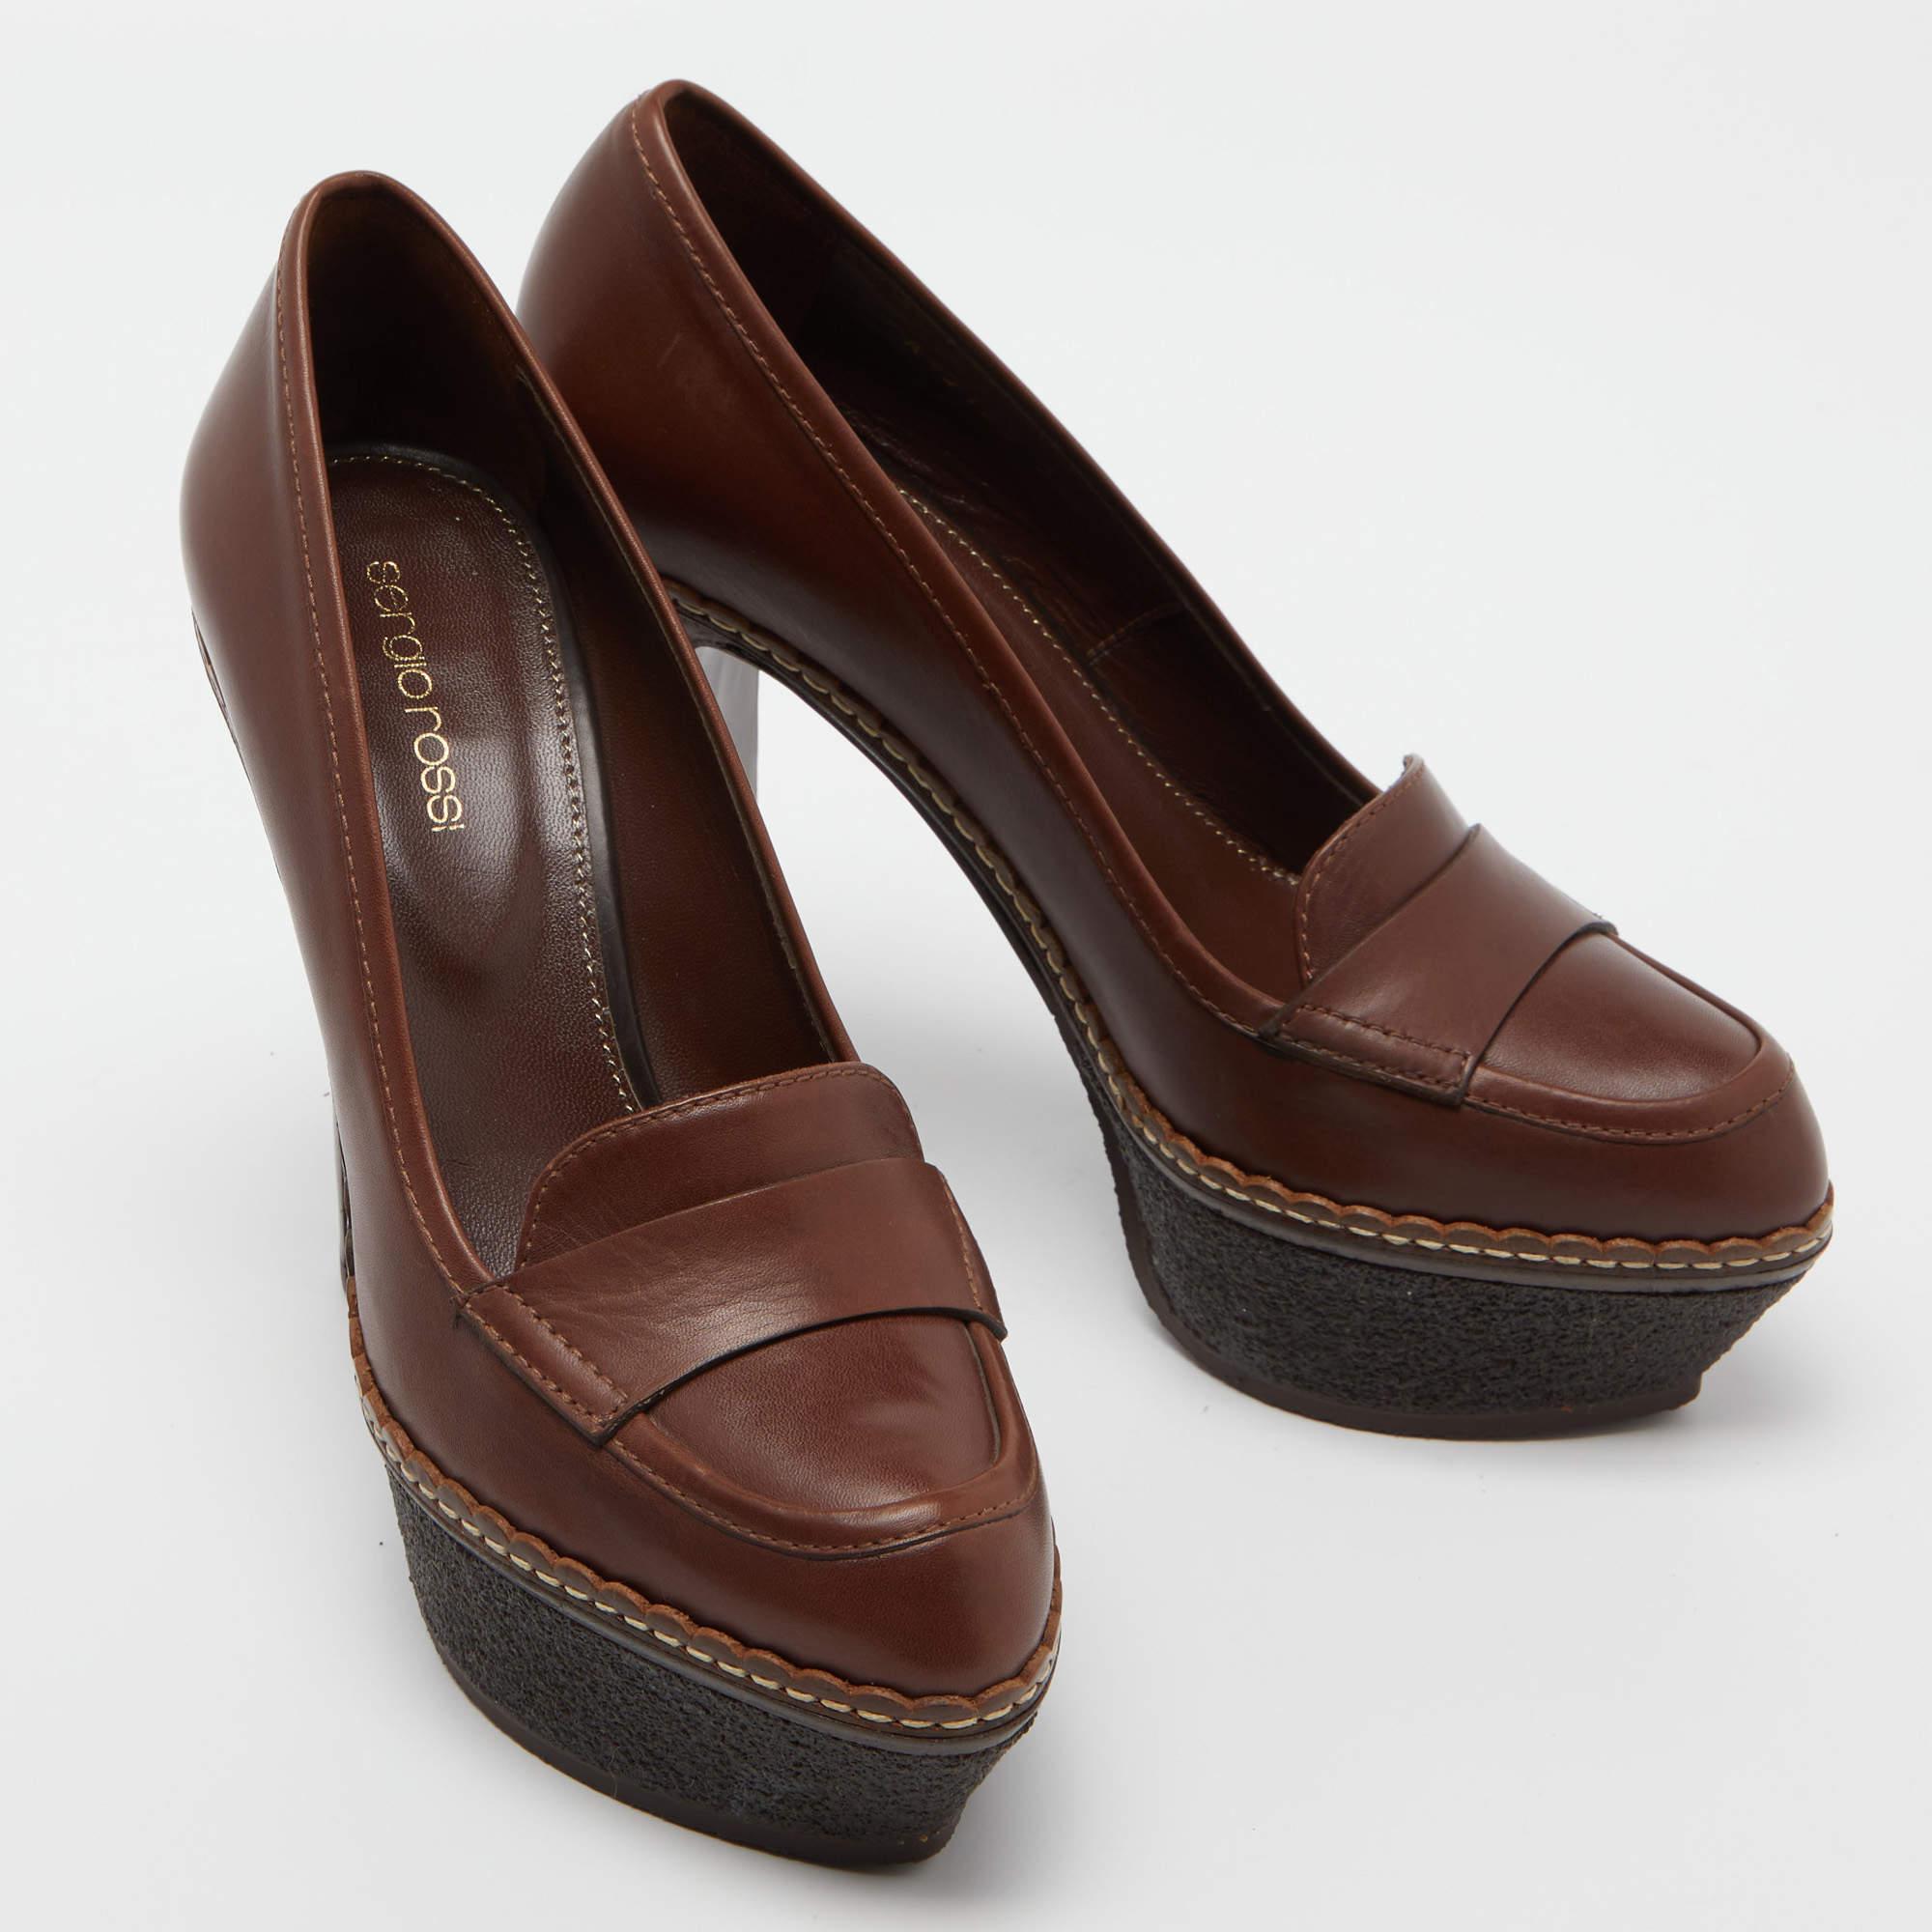 Exhibit an elegant style with this pair of pumps. These elegant shoes are crafted from quality materials. They are set on durable soles and sleek heels.

